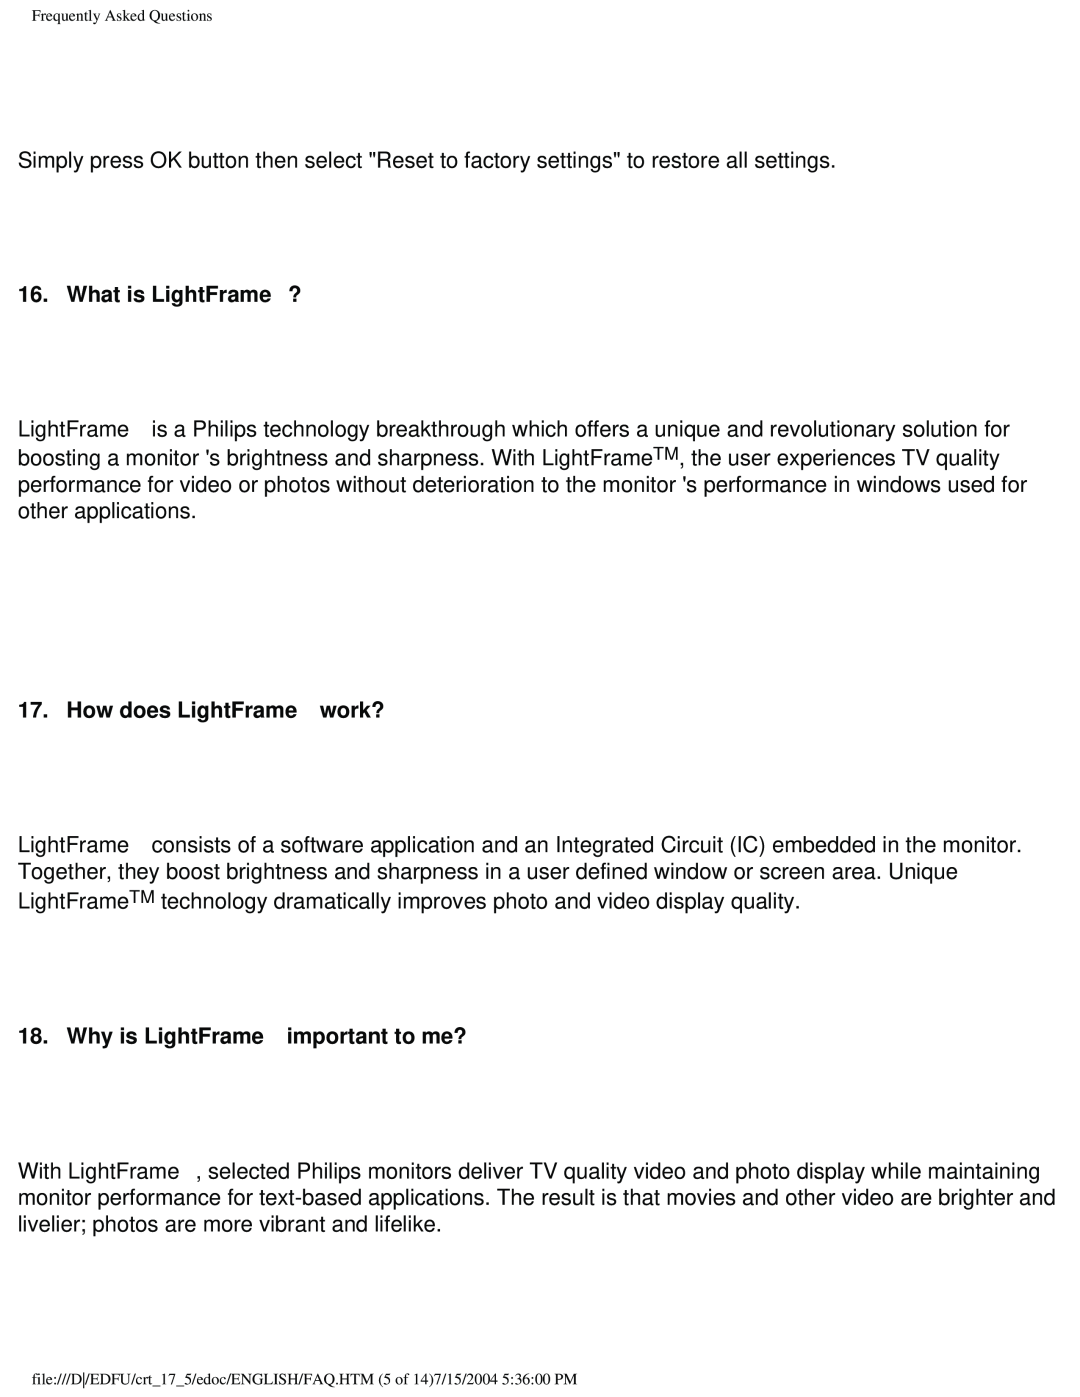 Philips 107G user manual What is LightFrame™ ?, How does LightFrame™ work?, Why is LightFrame™ important to me? 